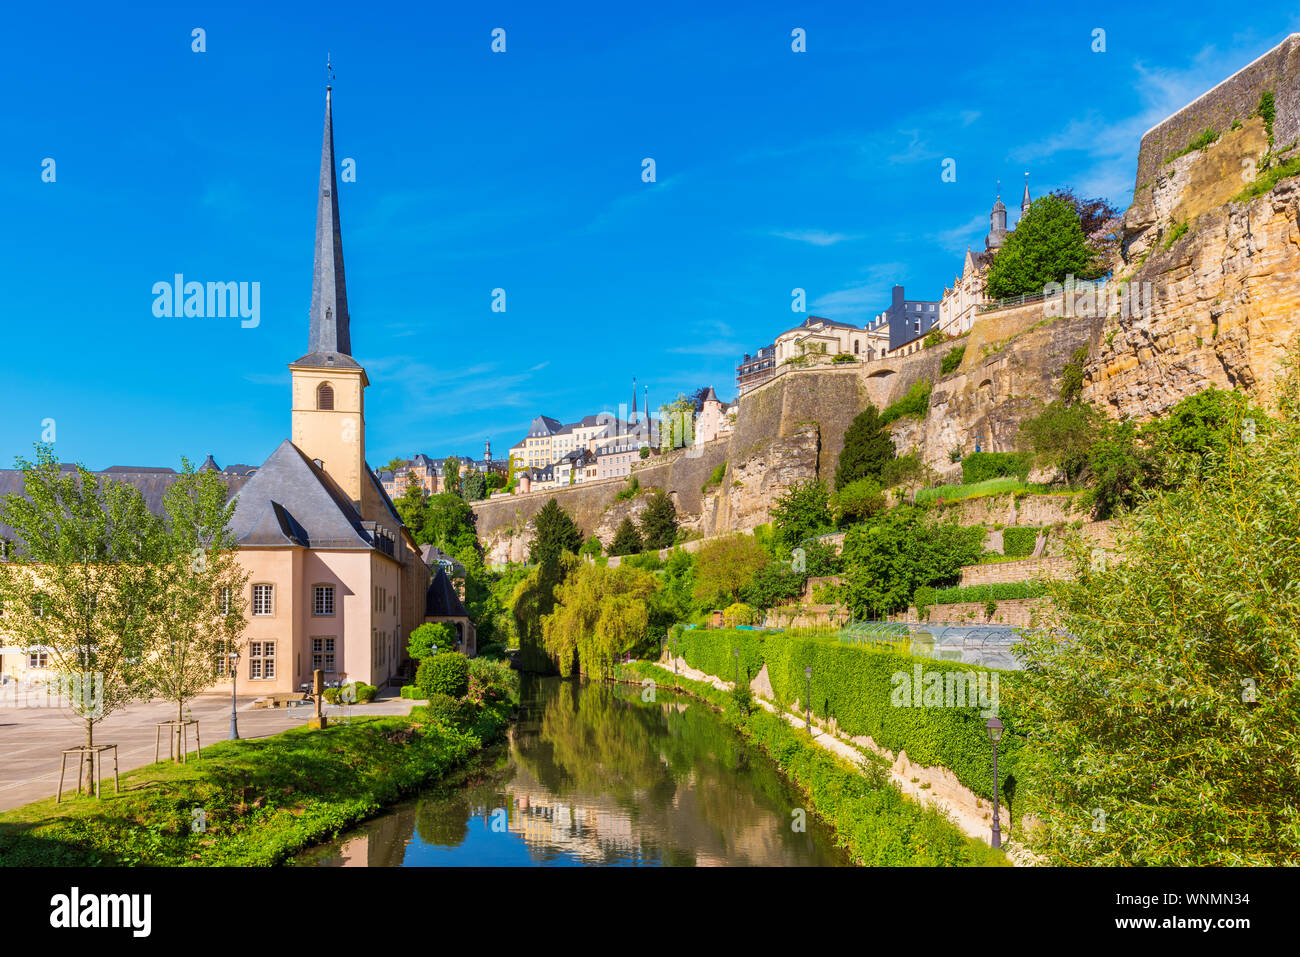 Church along Alzette River in downtown district of Luxembourg City, capital of Luxembourg Stock Photo